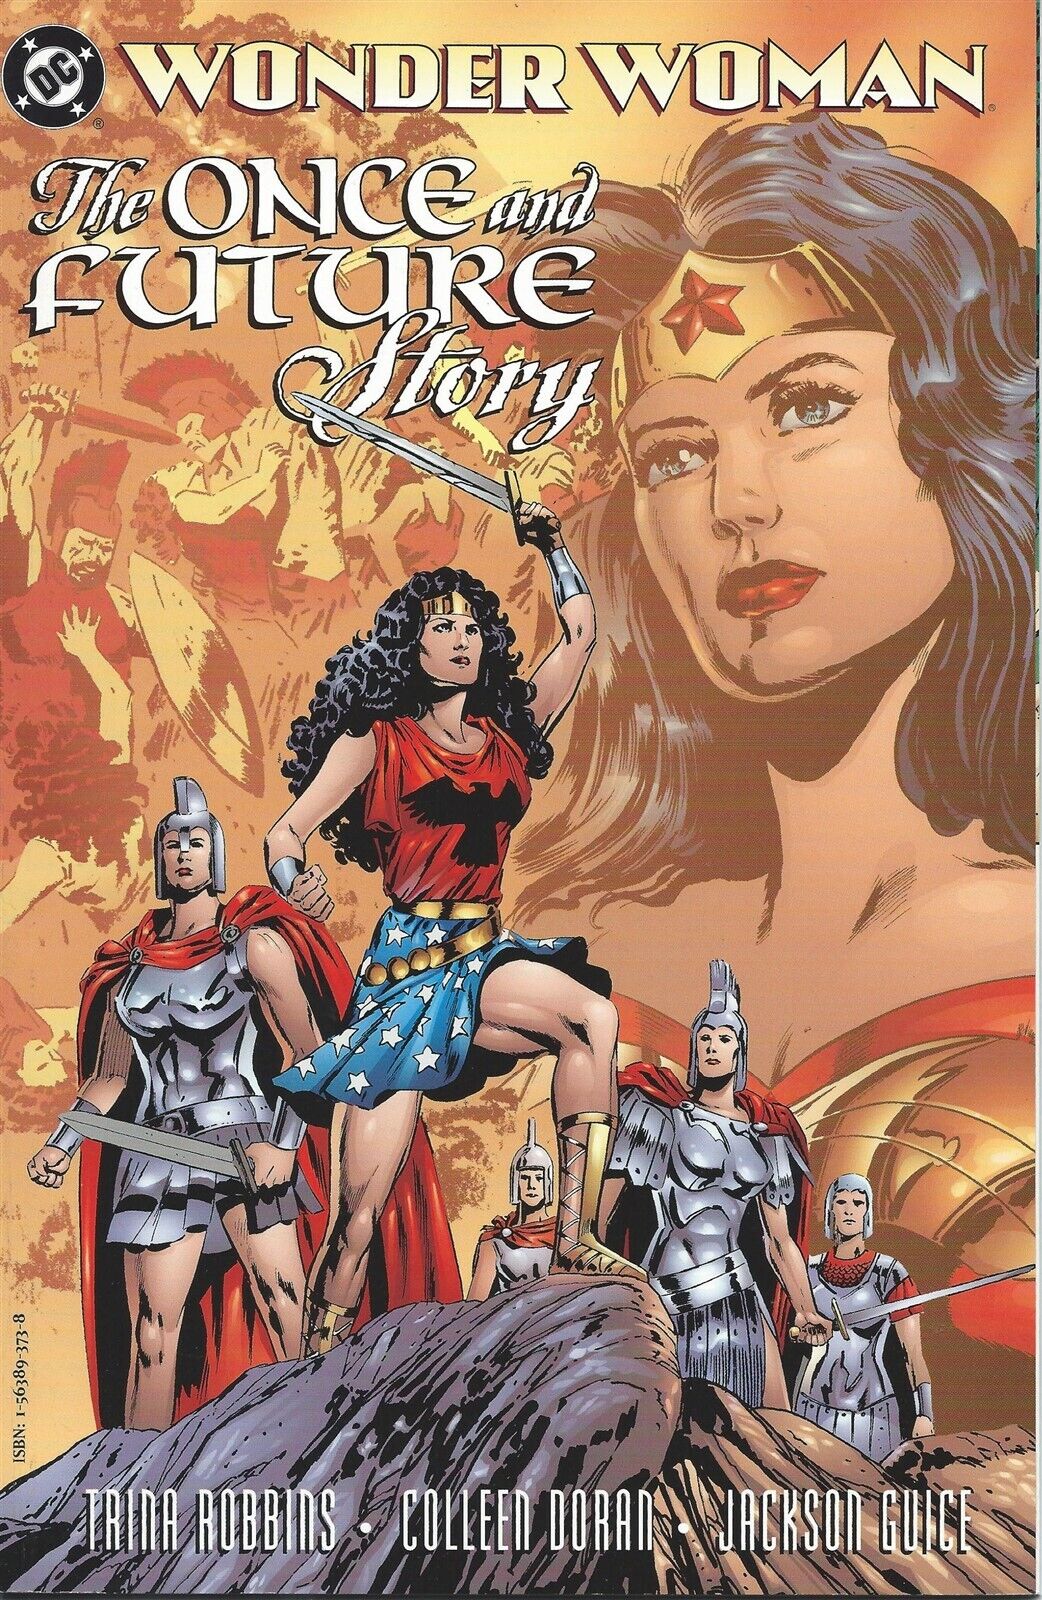 Wonder Woman The Once and Future Story (DC-1998) #1 Explores Domestic Violence